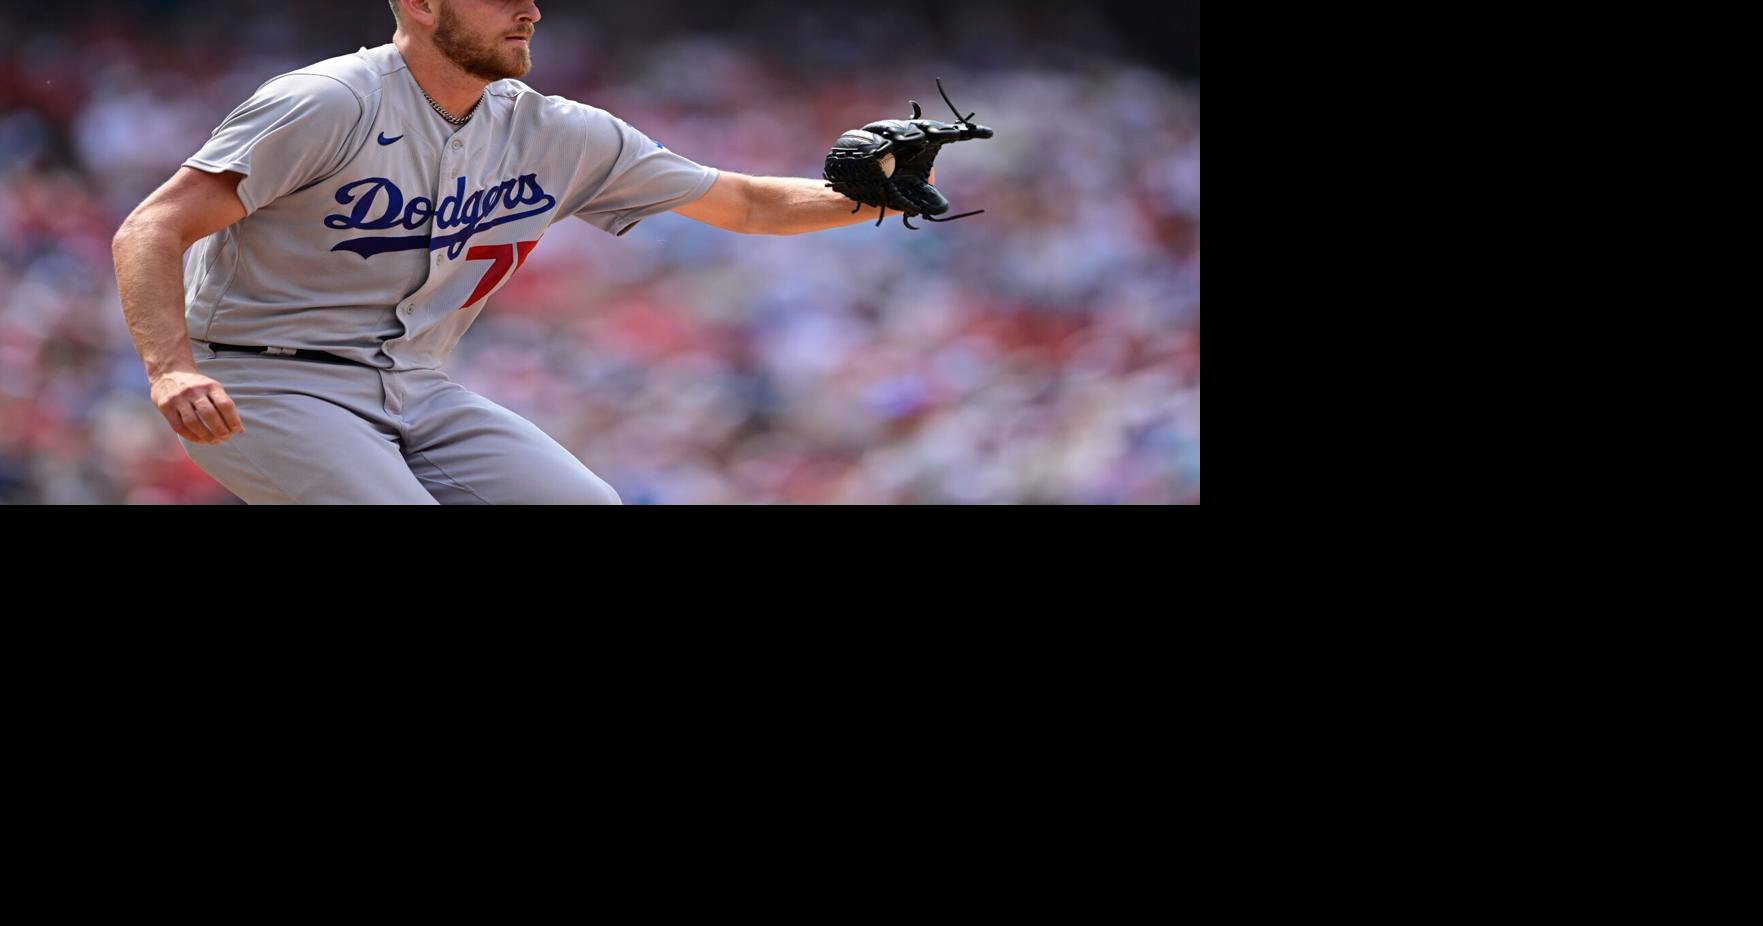 Dodgers second half promotions  The second half promos are live